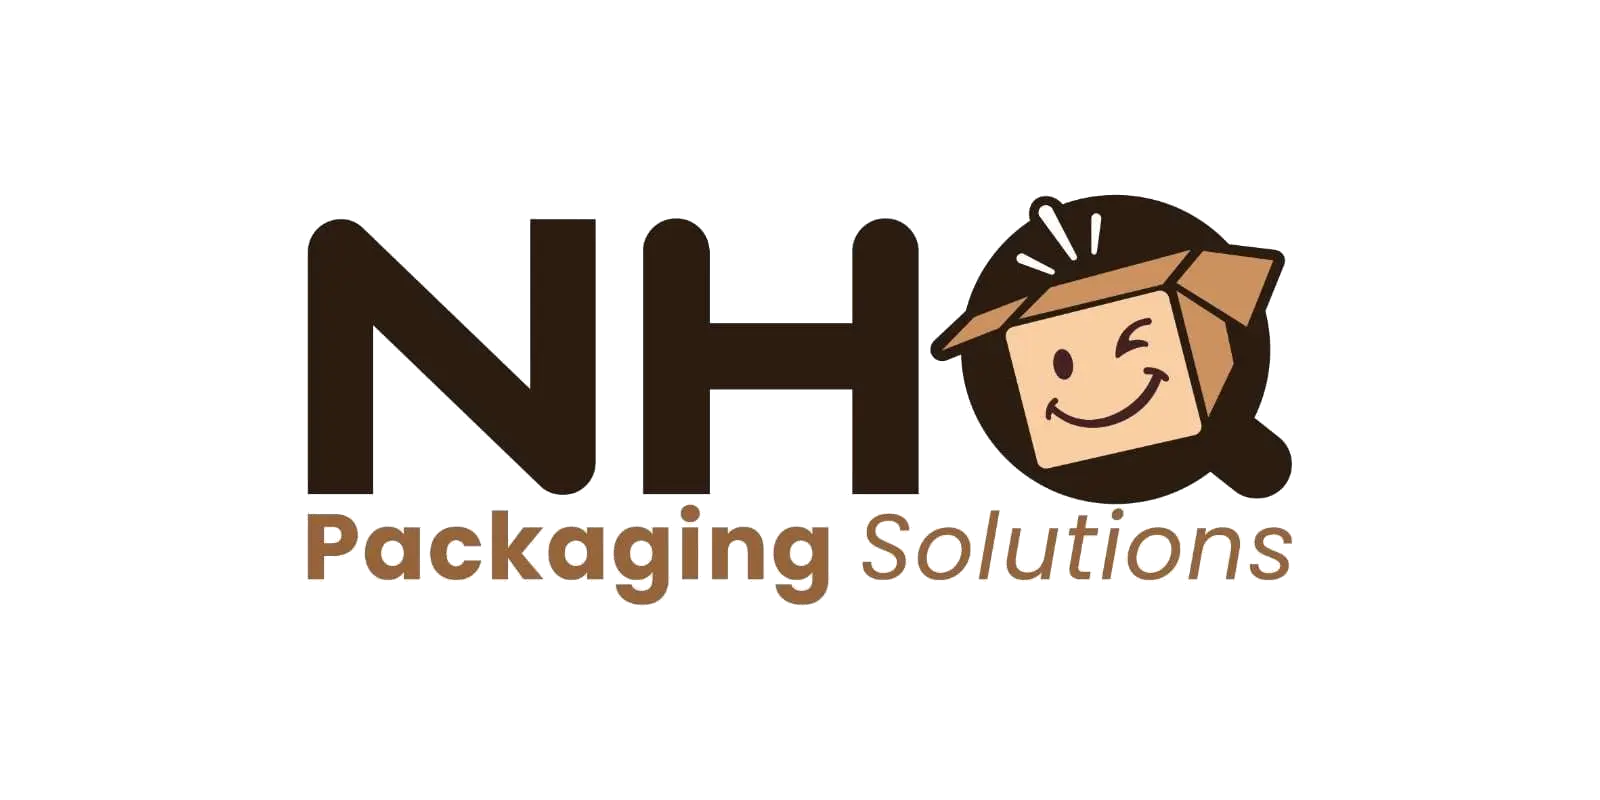 NHQ Packaging Solutions